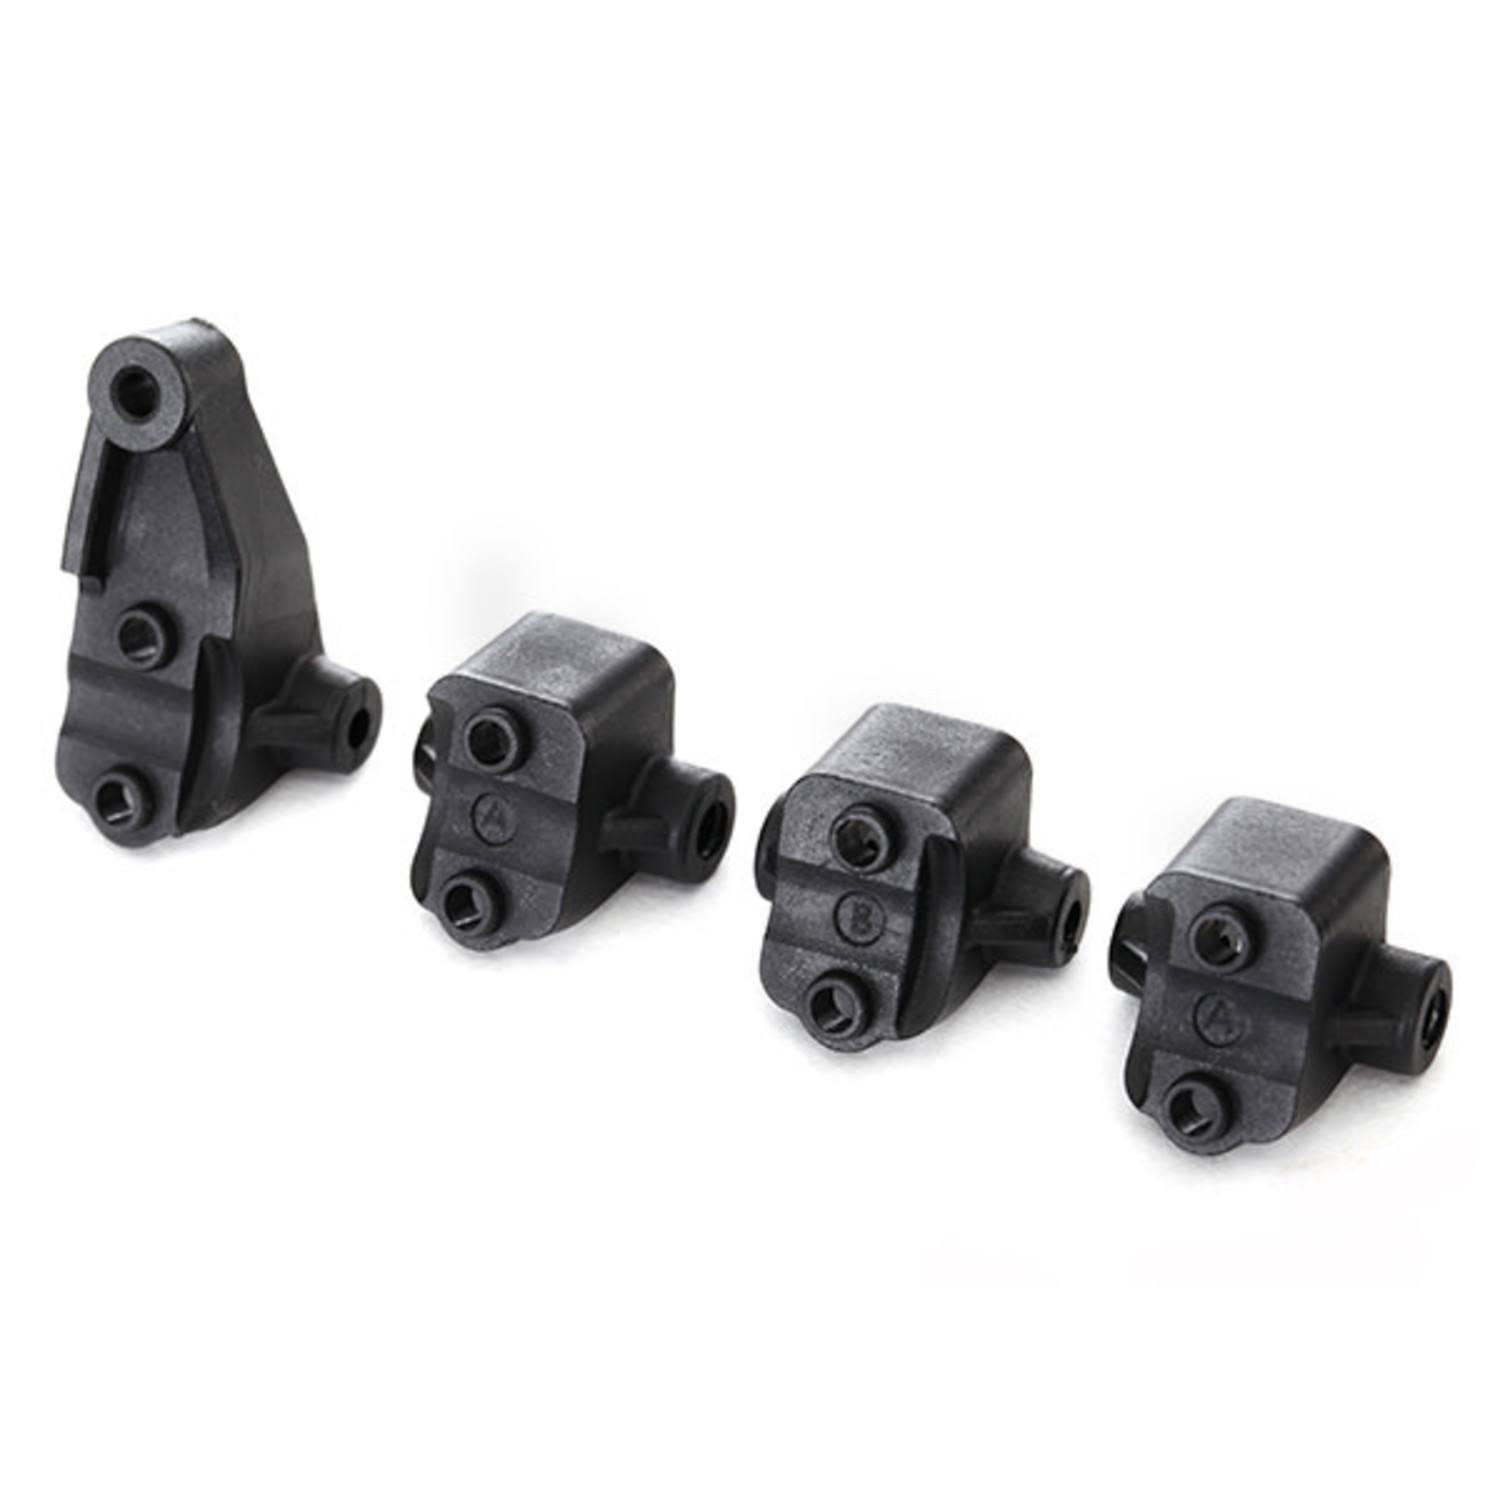 Traxxas 8227 Complete Front and Rear Suspension Axle Mount Set